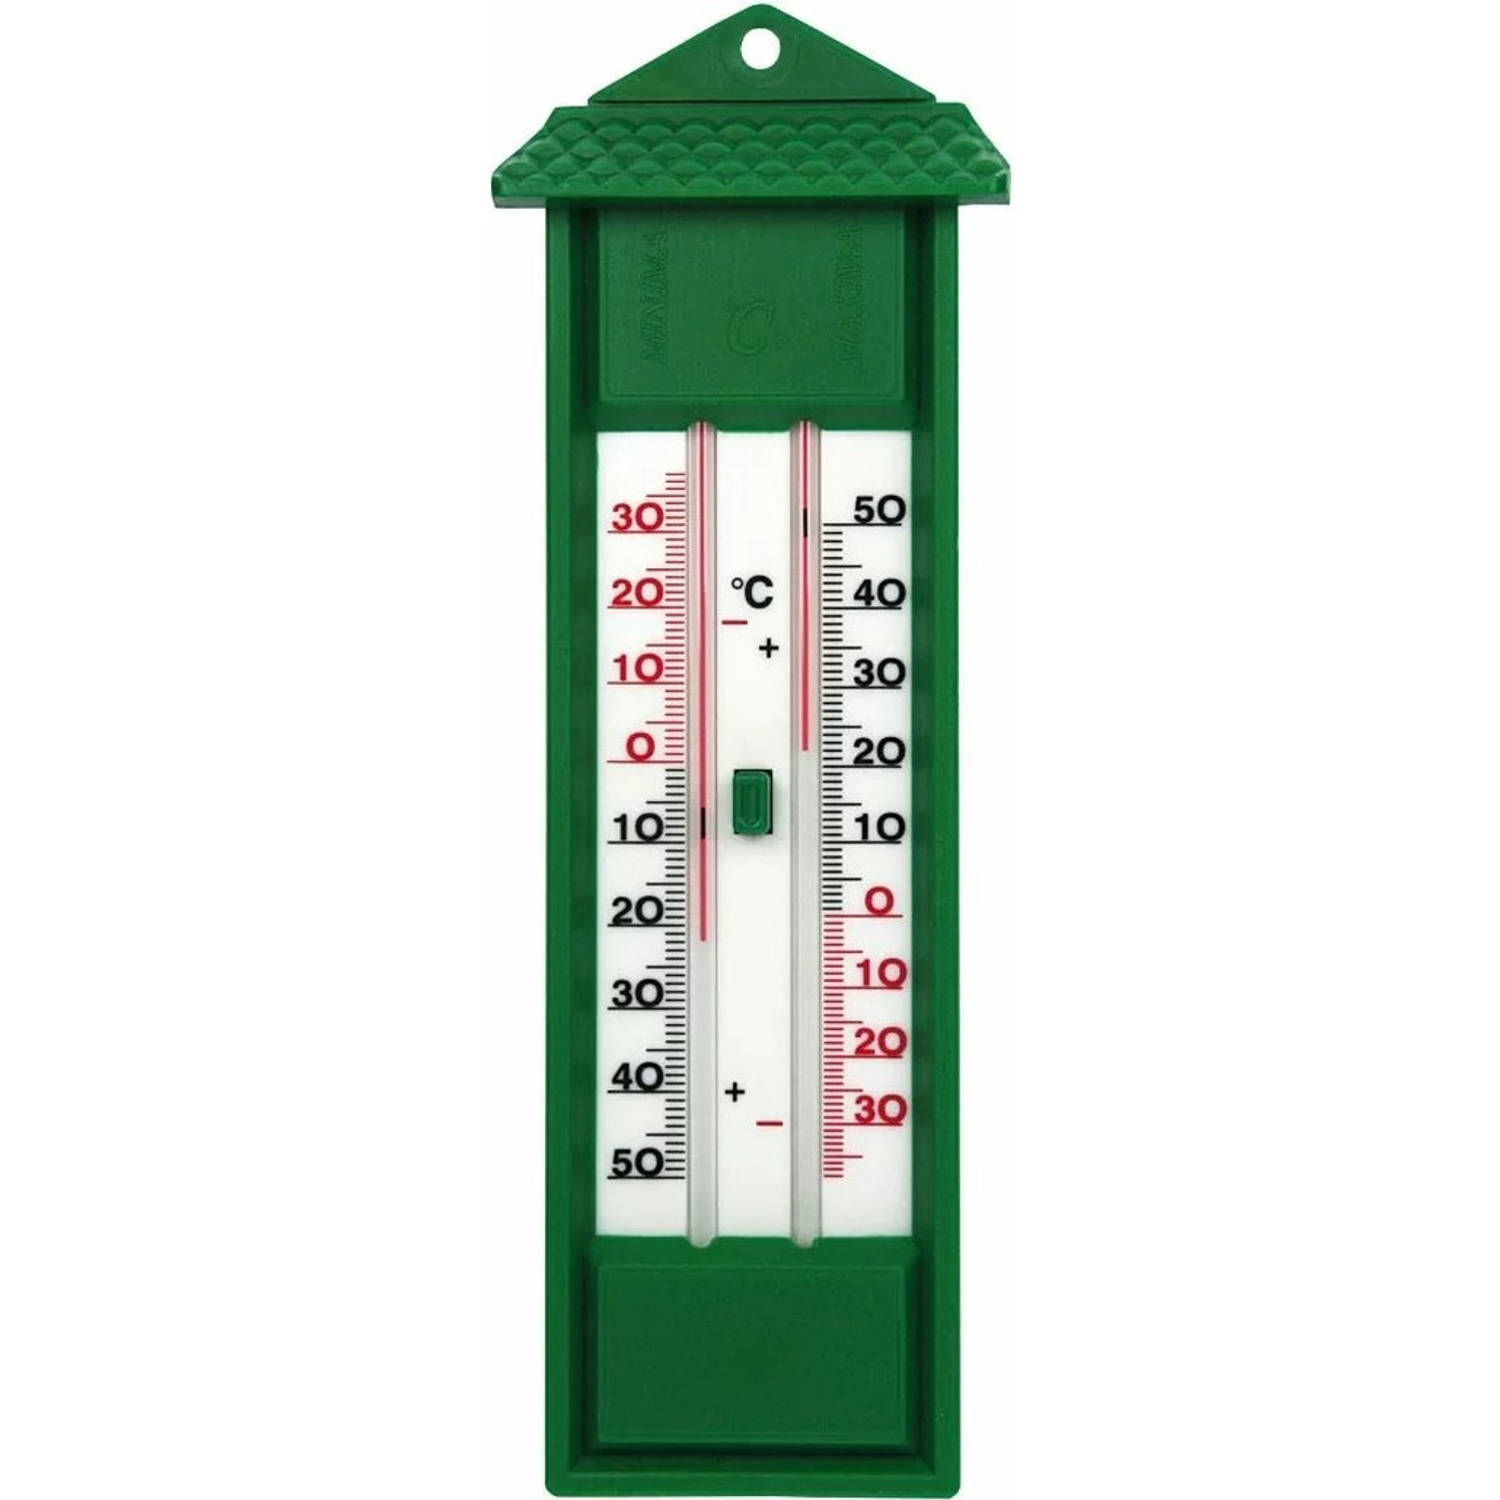 Thermometer min/max - groen - kunststof - 31 cm - Buitenthermometers